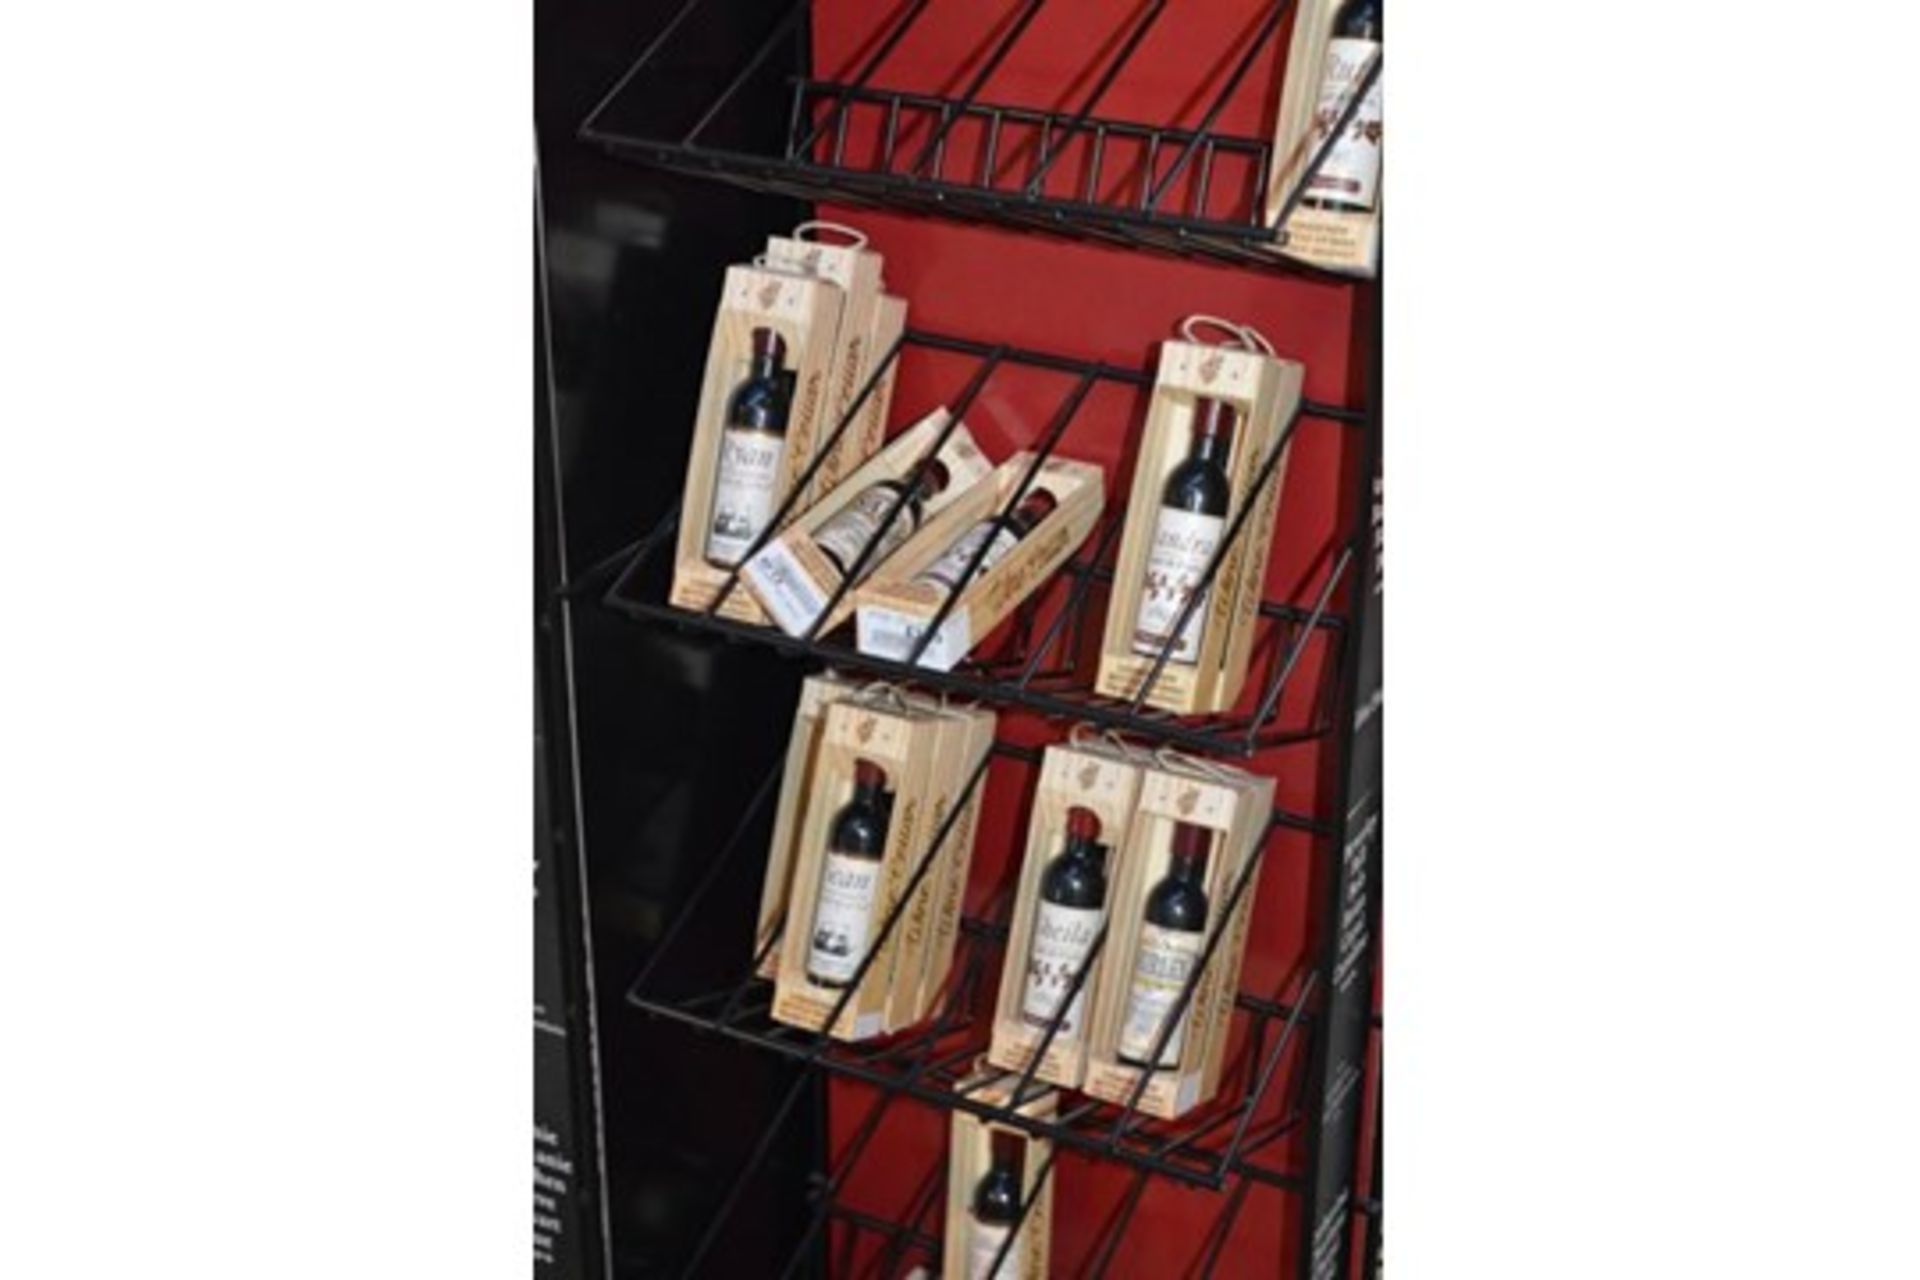 27 x Retail Carousel Display Stands With Approximately 2,800 Items of Resale Stock - Includes - Image 24 of 61